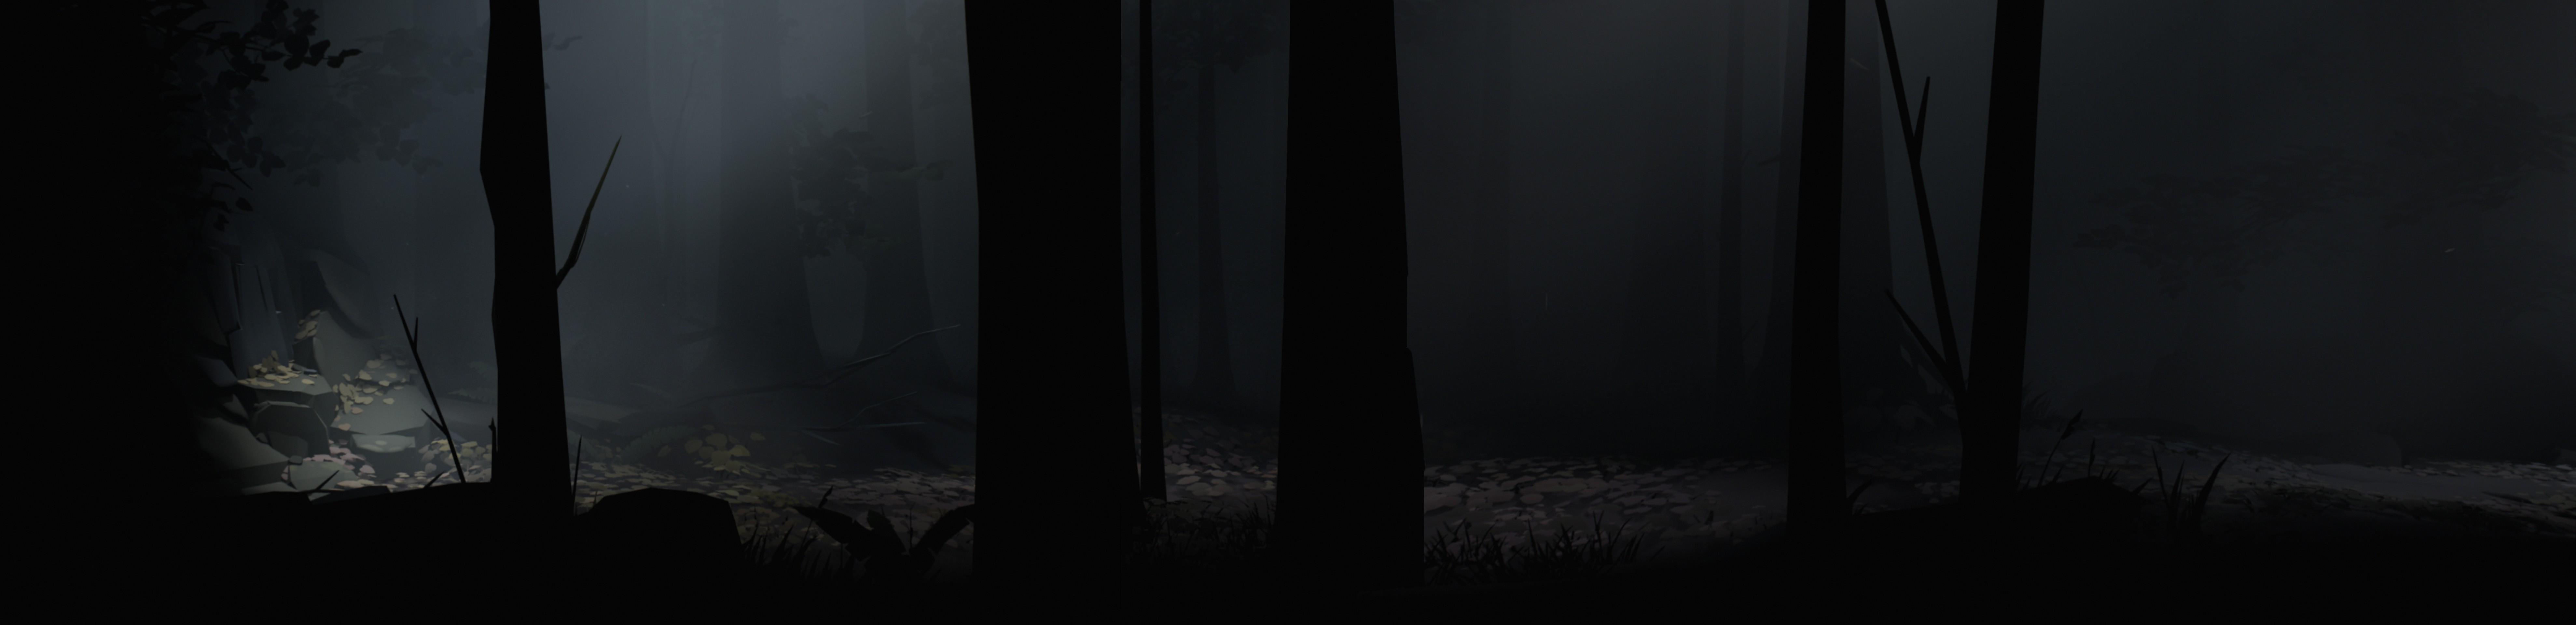 Inside Panoramas Gamers Forest Dark Contrast 7914x1920